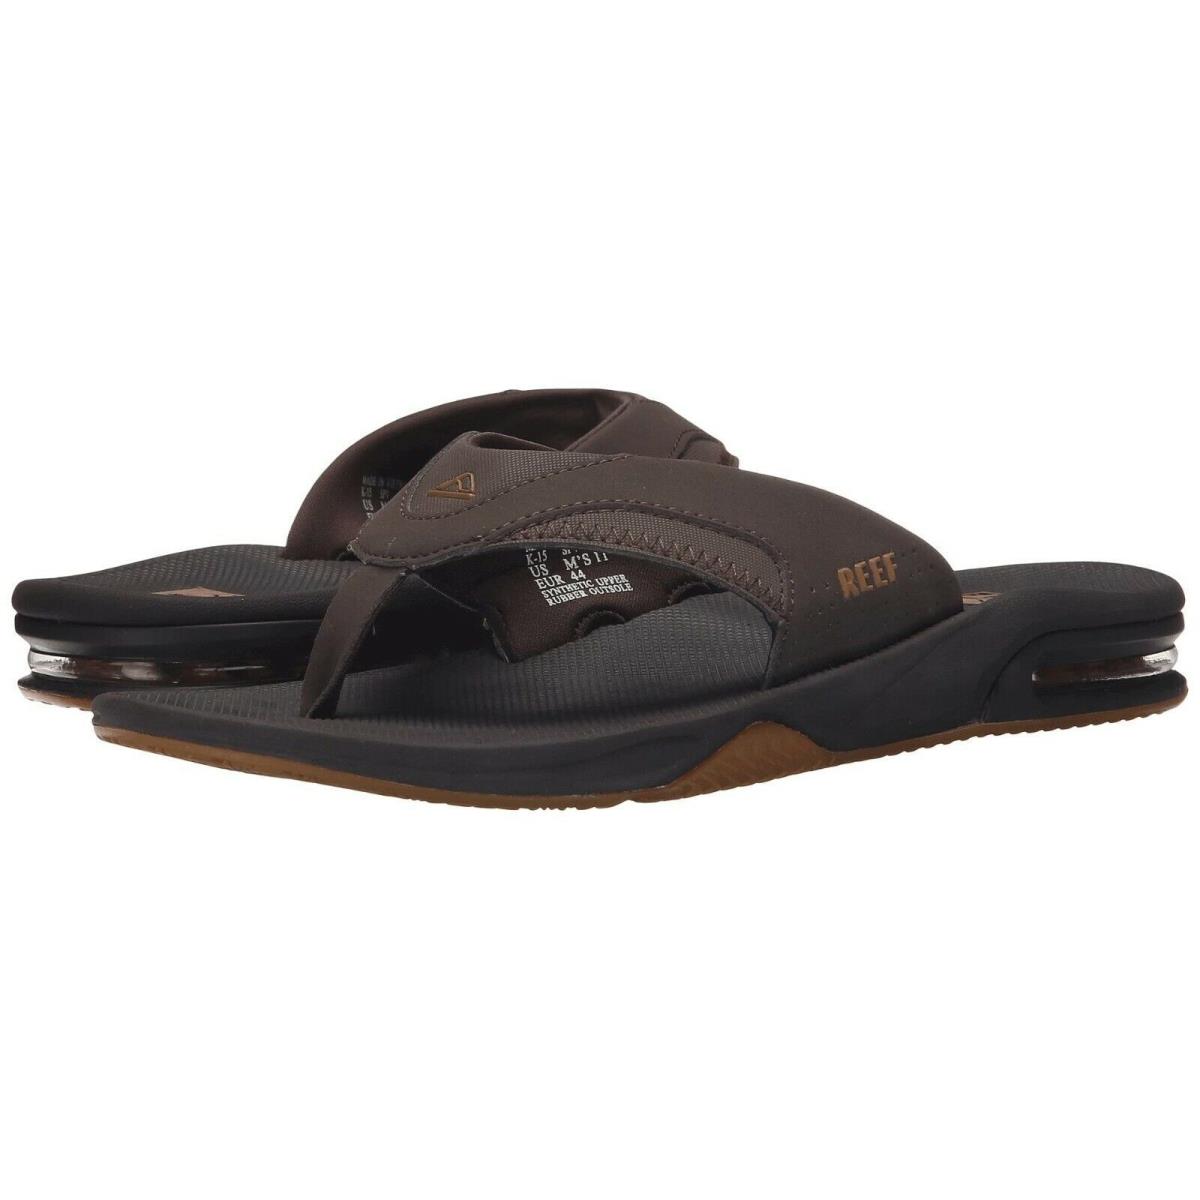 Man Reef Fanning Flip Flop Sandal RF2026 with Arch Support Color Brown/gum